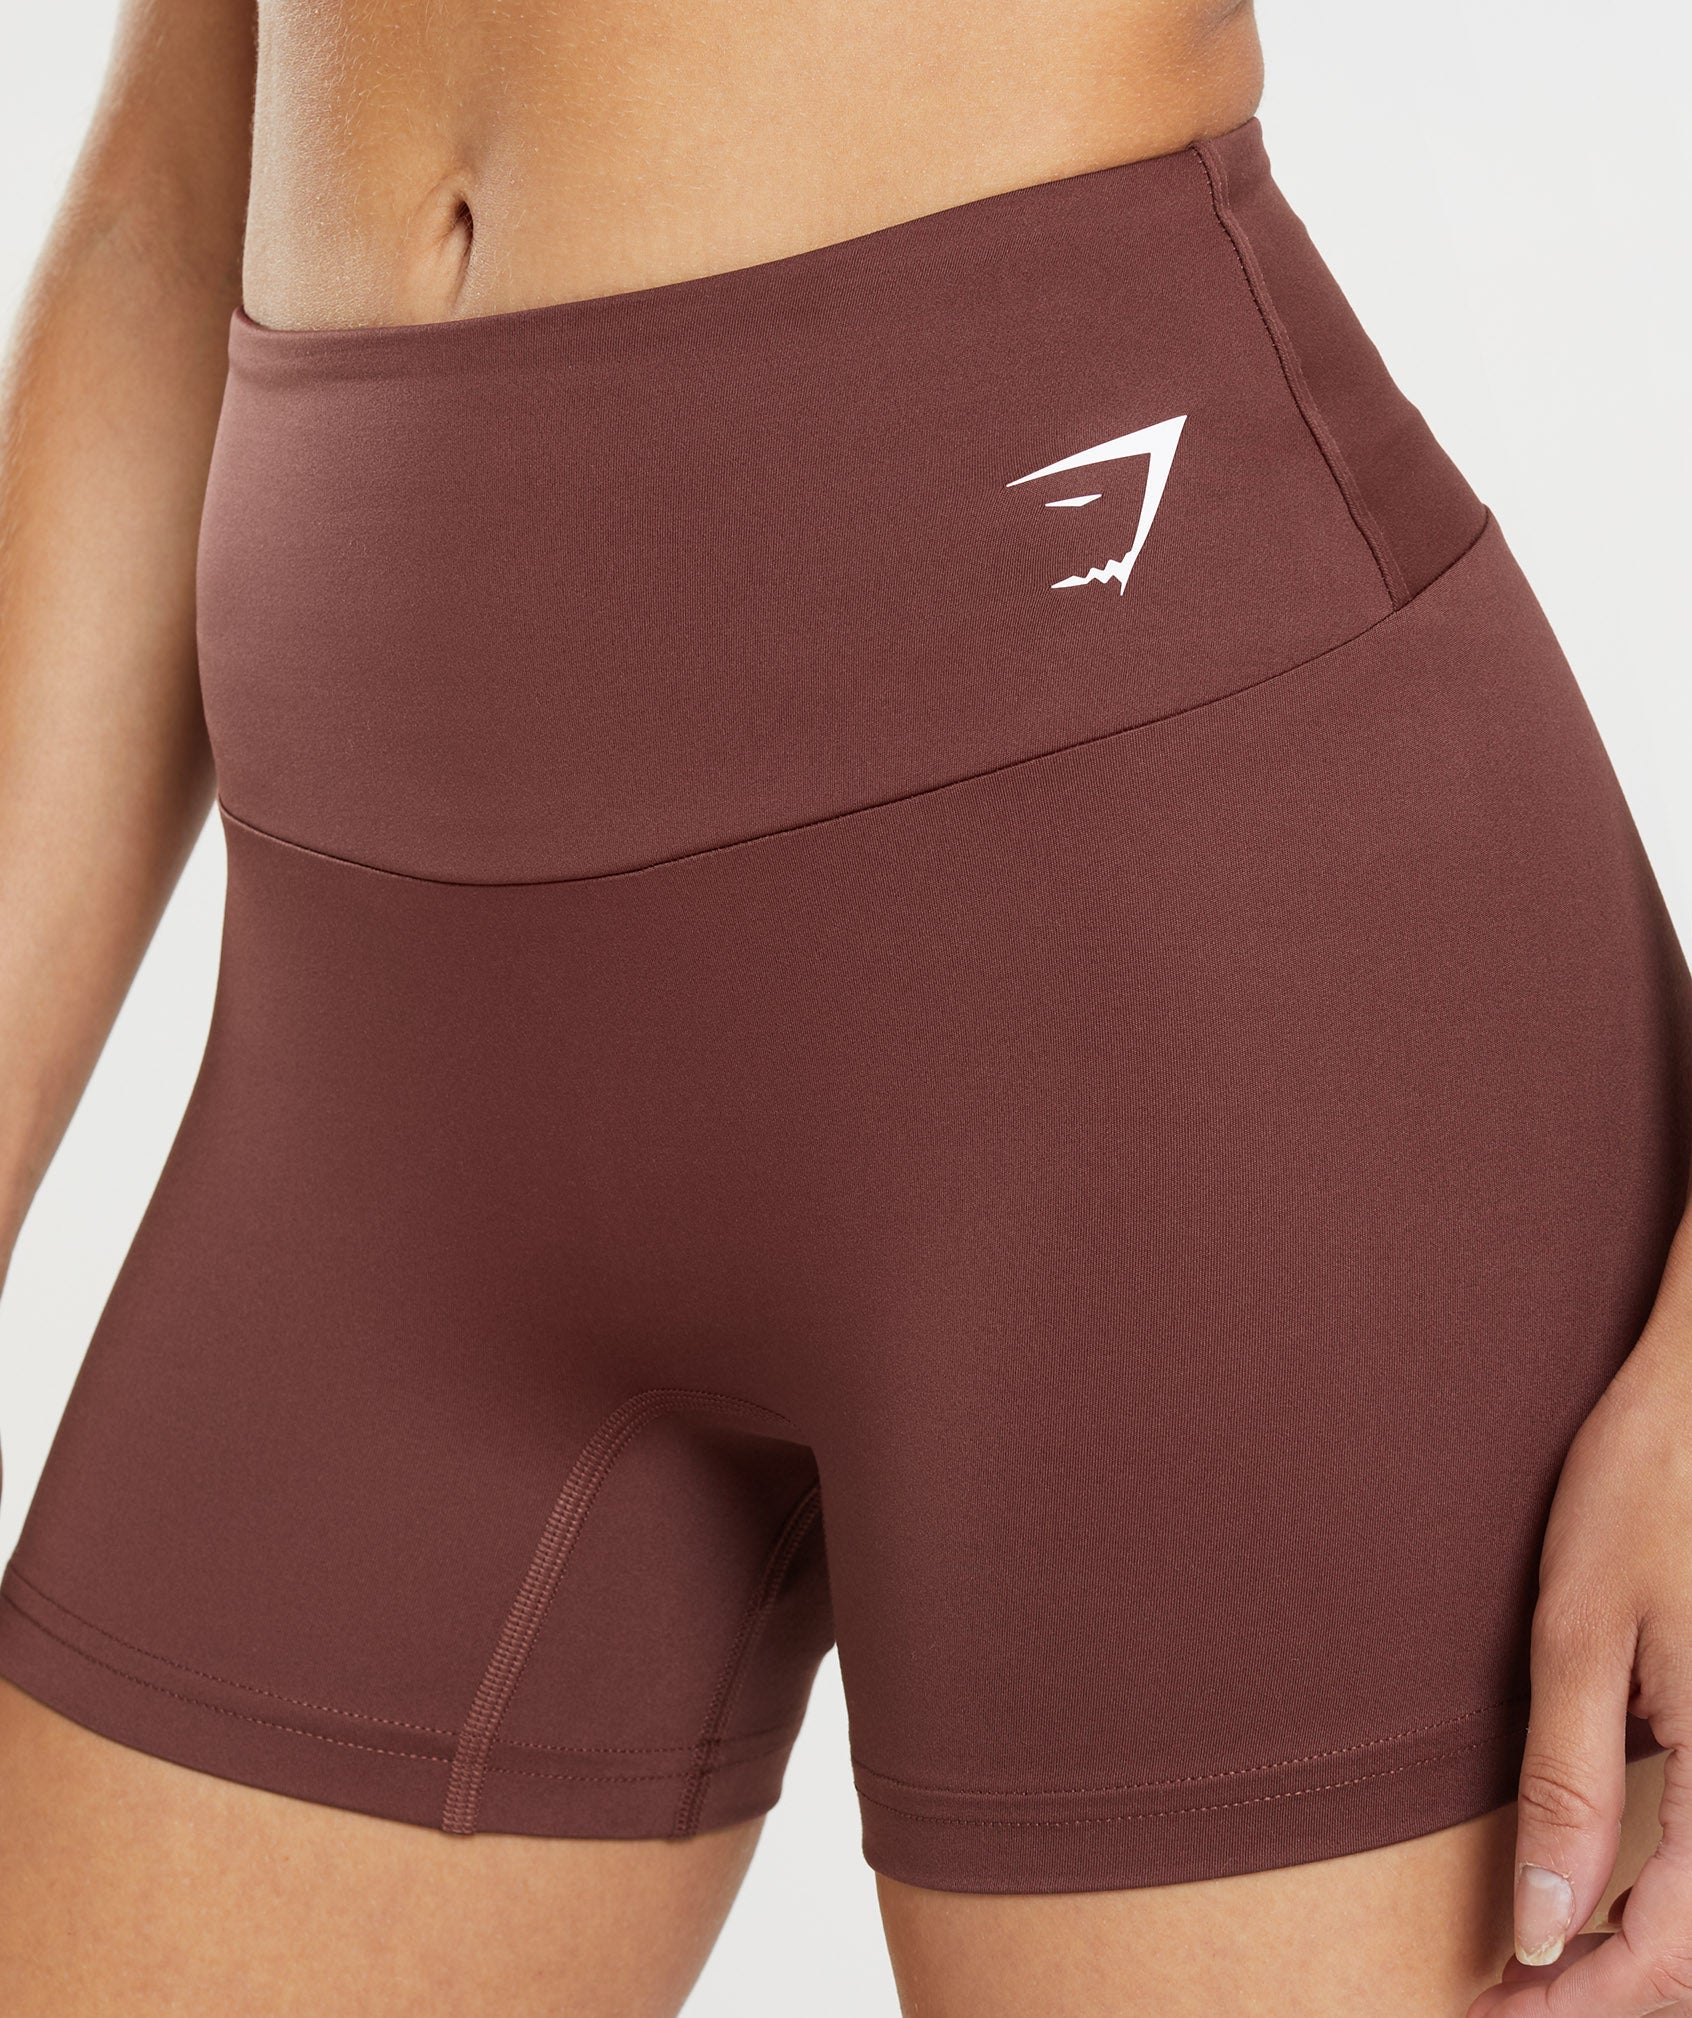 Training Shorts in Cherry Brown - view 3